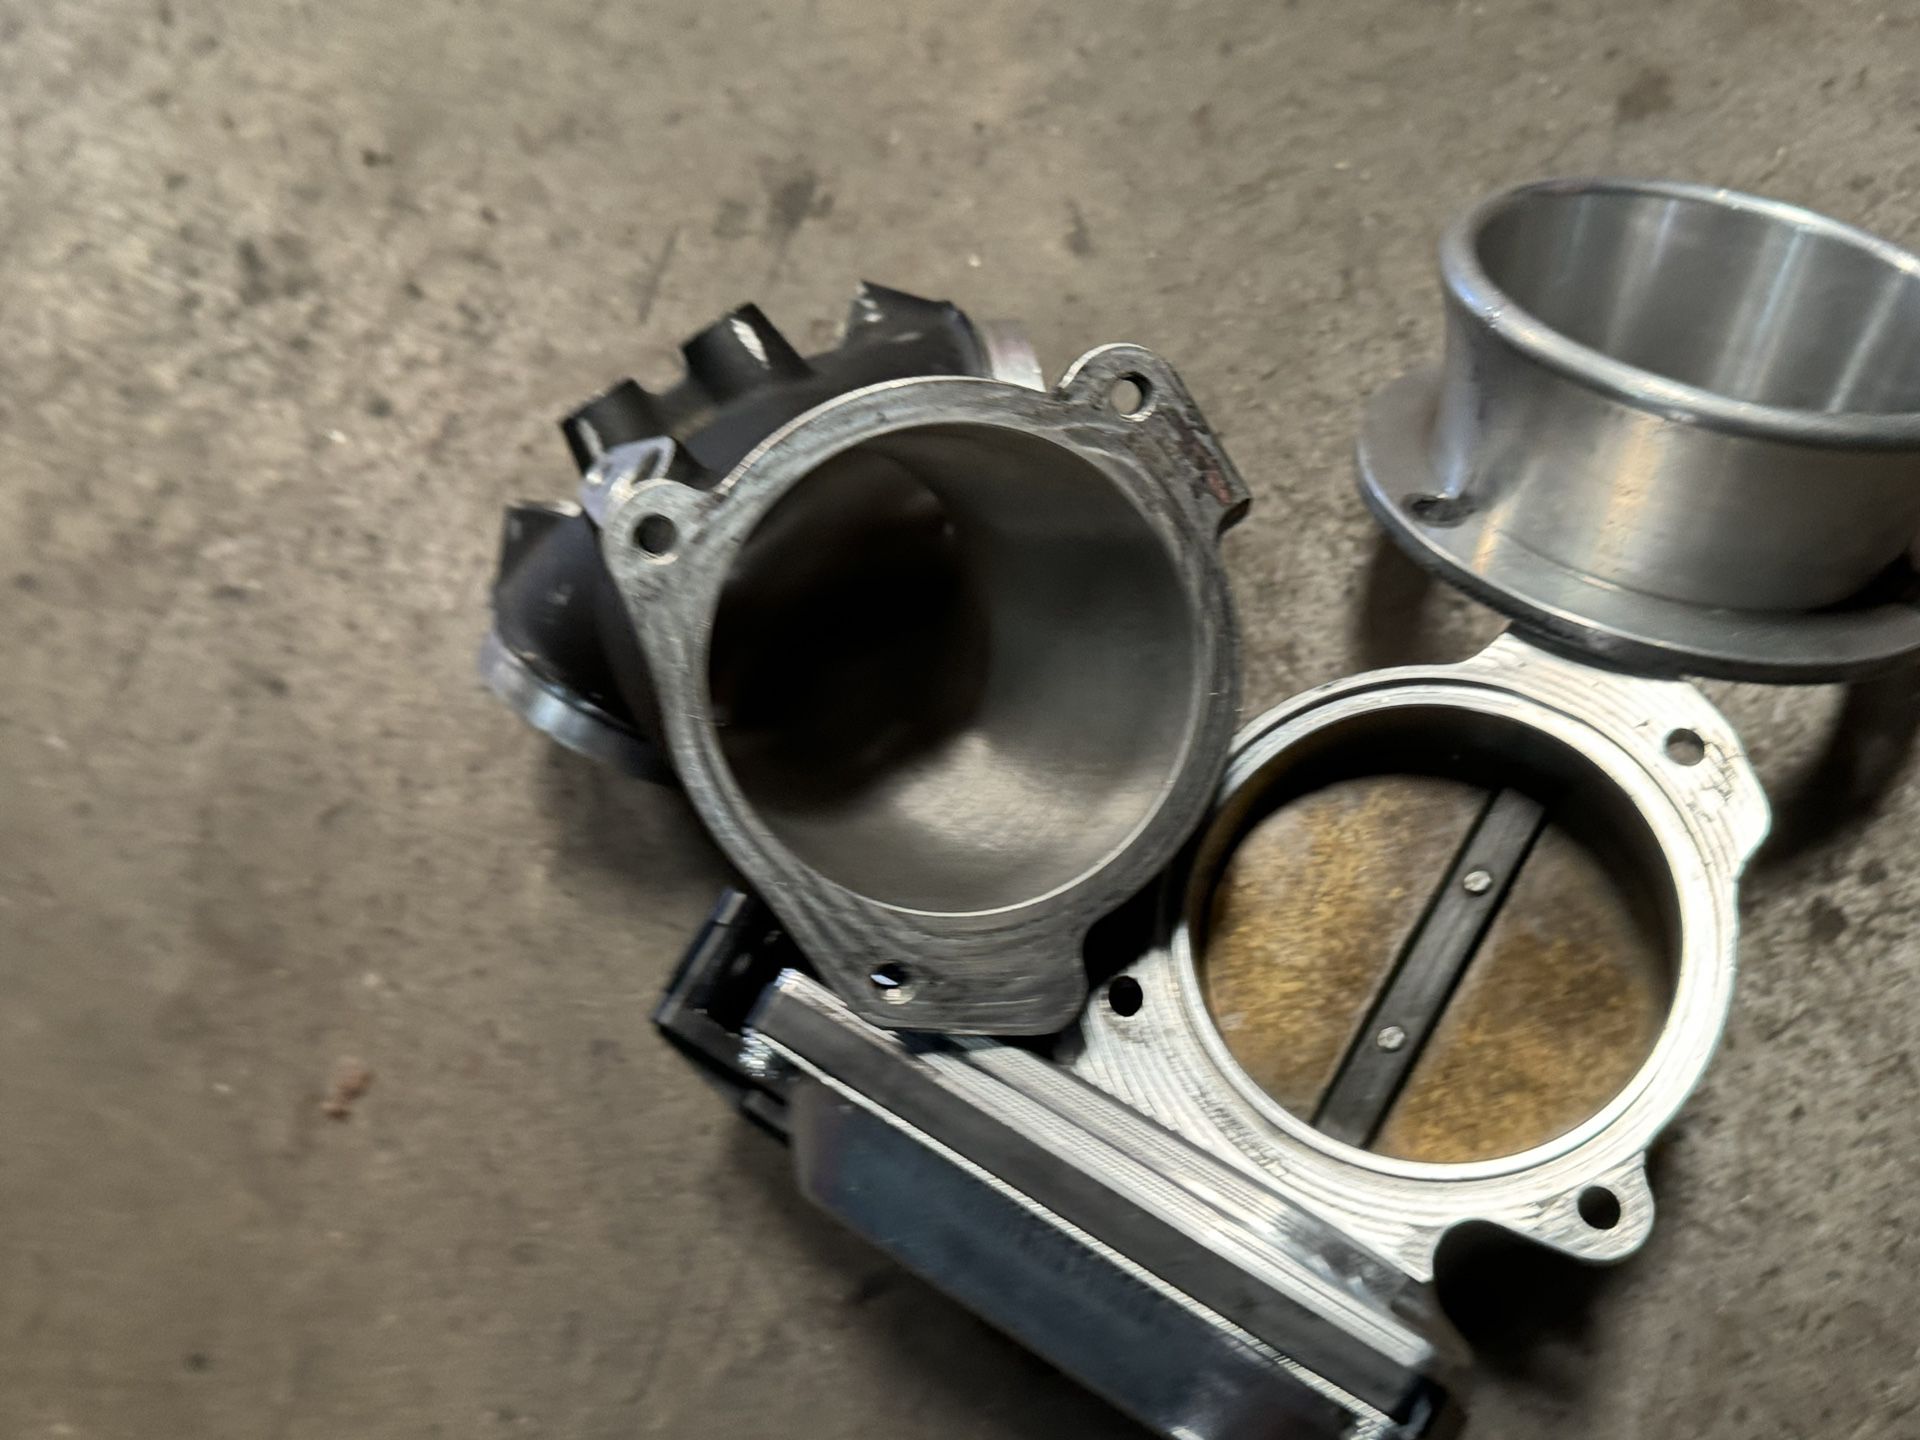 70mm Hpi Throttle Body And Manifold For M8 Harley